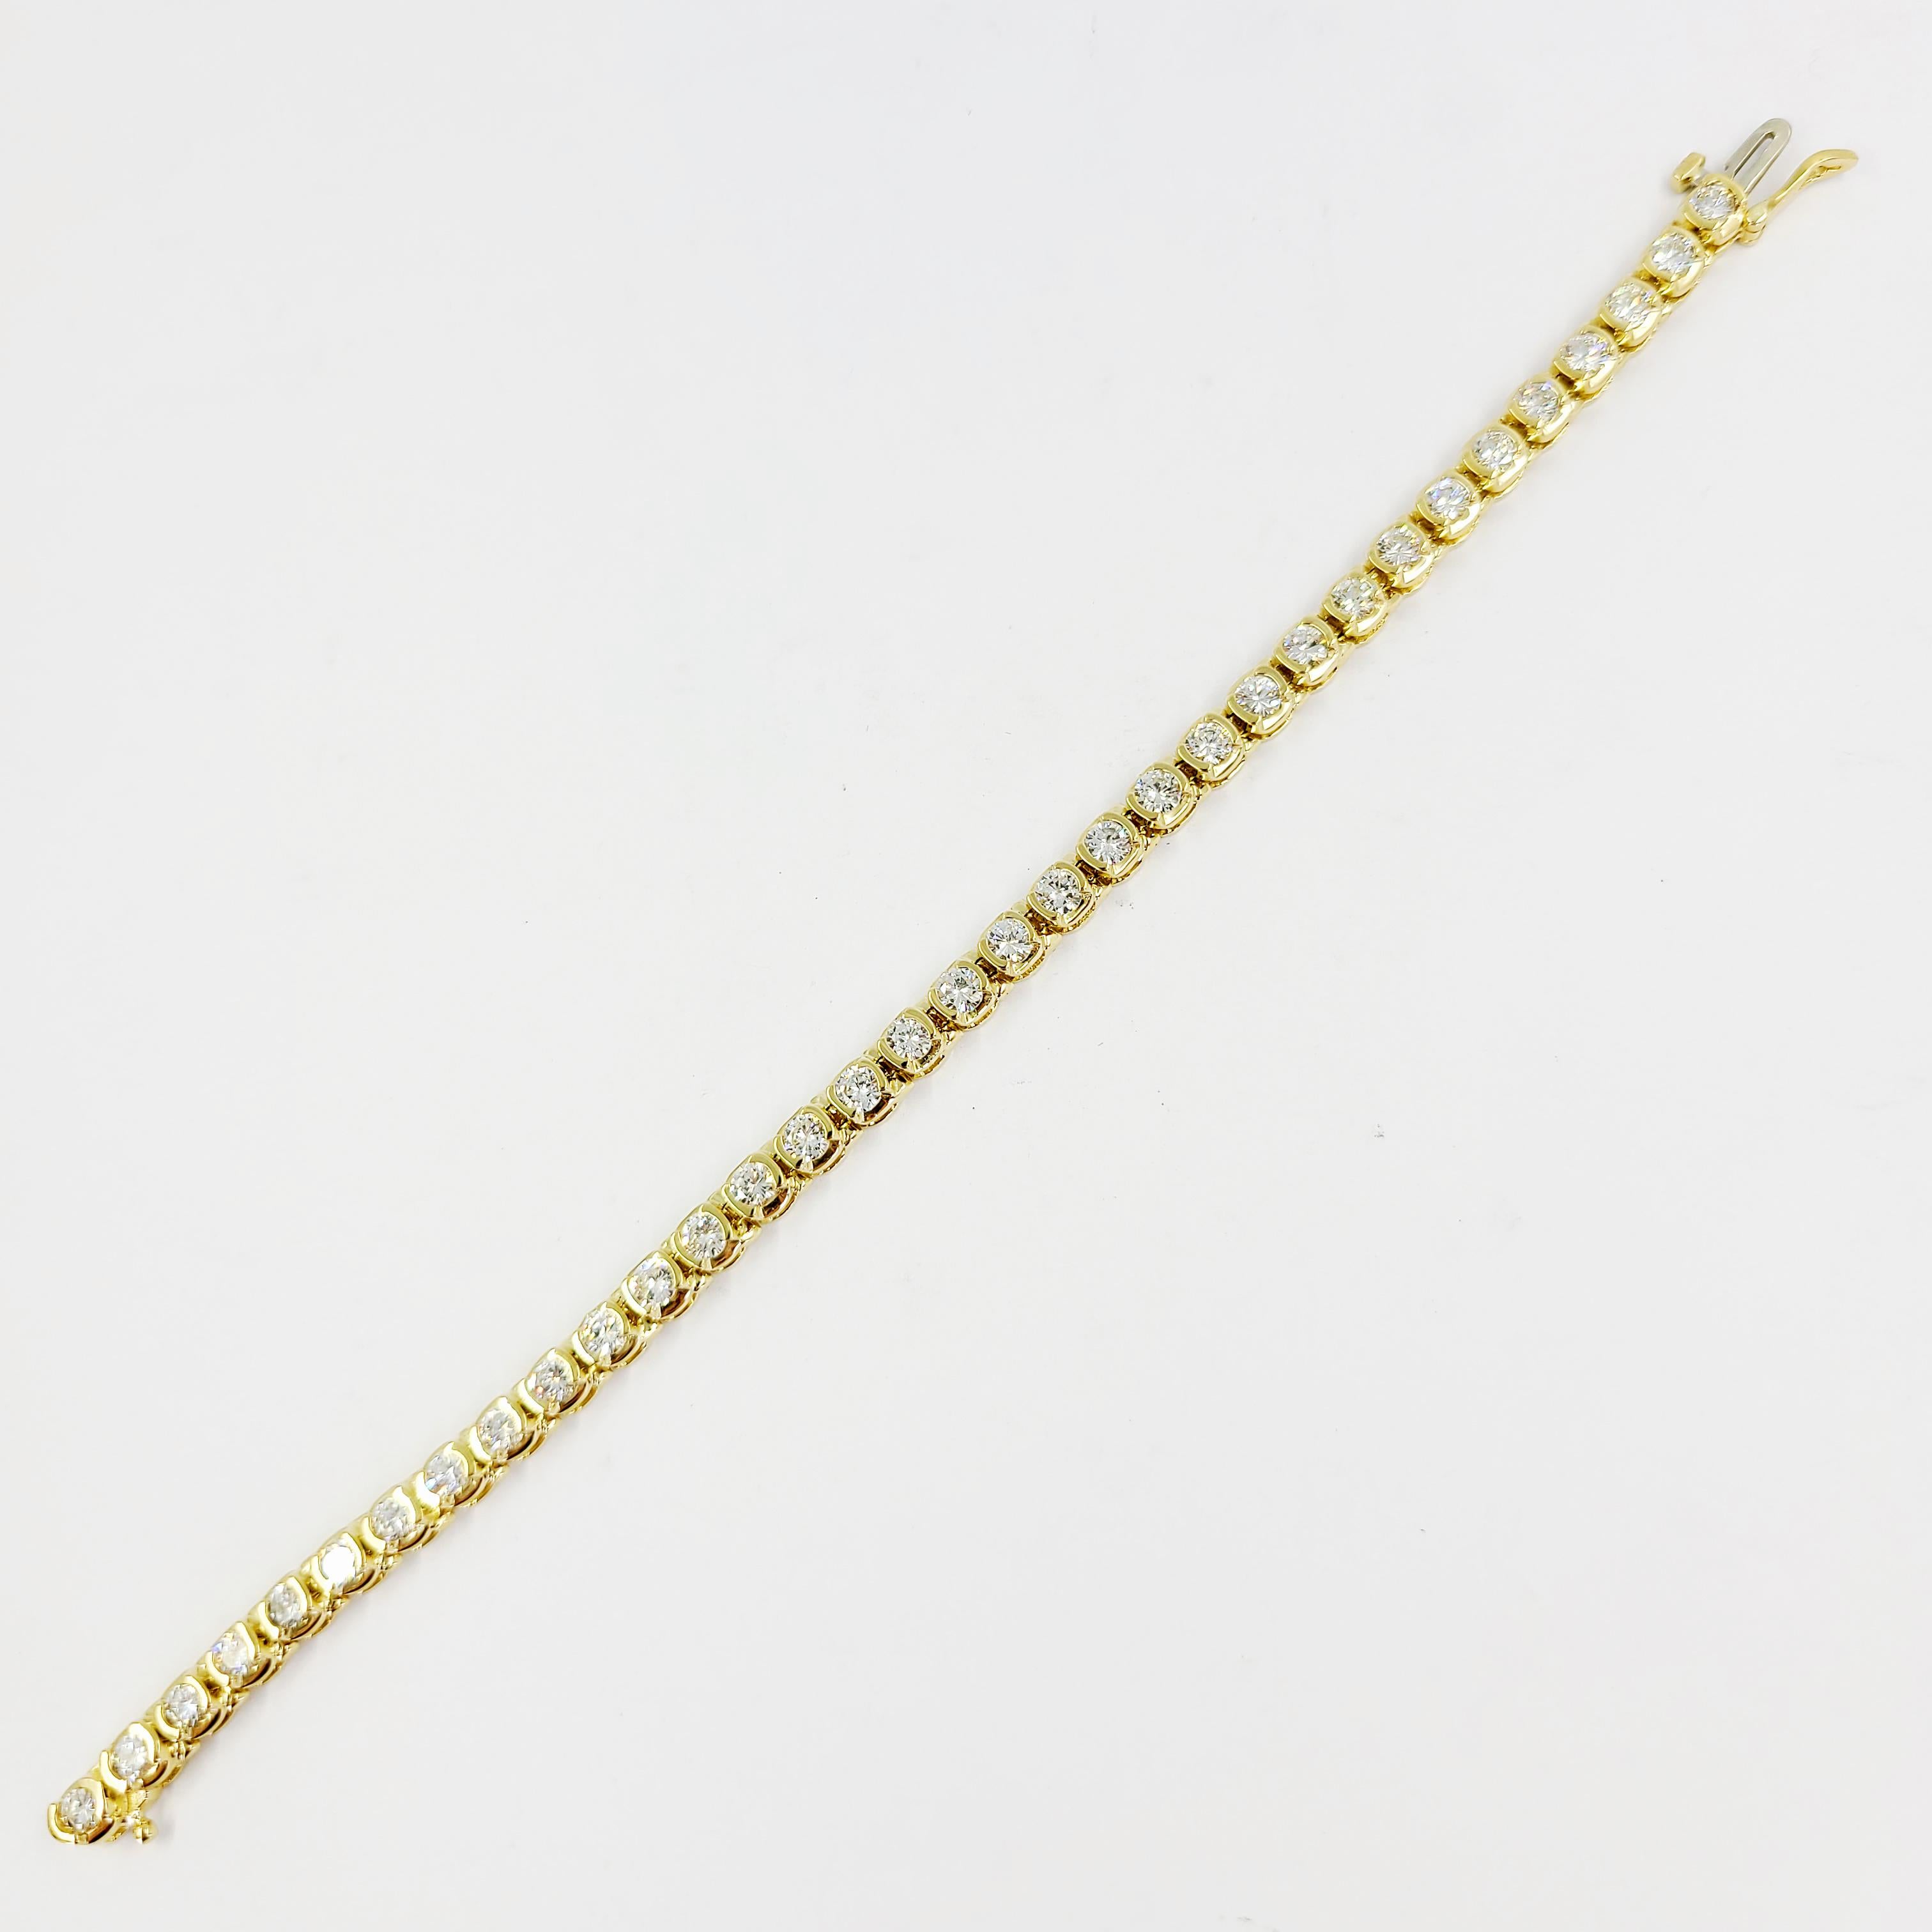 Yellow Gold Diamond Tennis Bracelet Line Bracelet In Good Condition For Sale In Coral Gables, FL